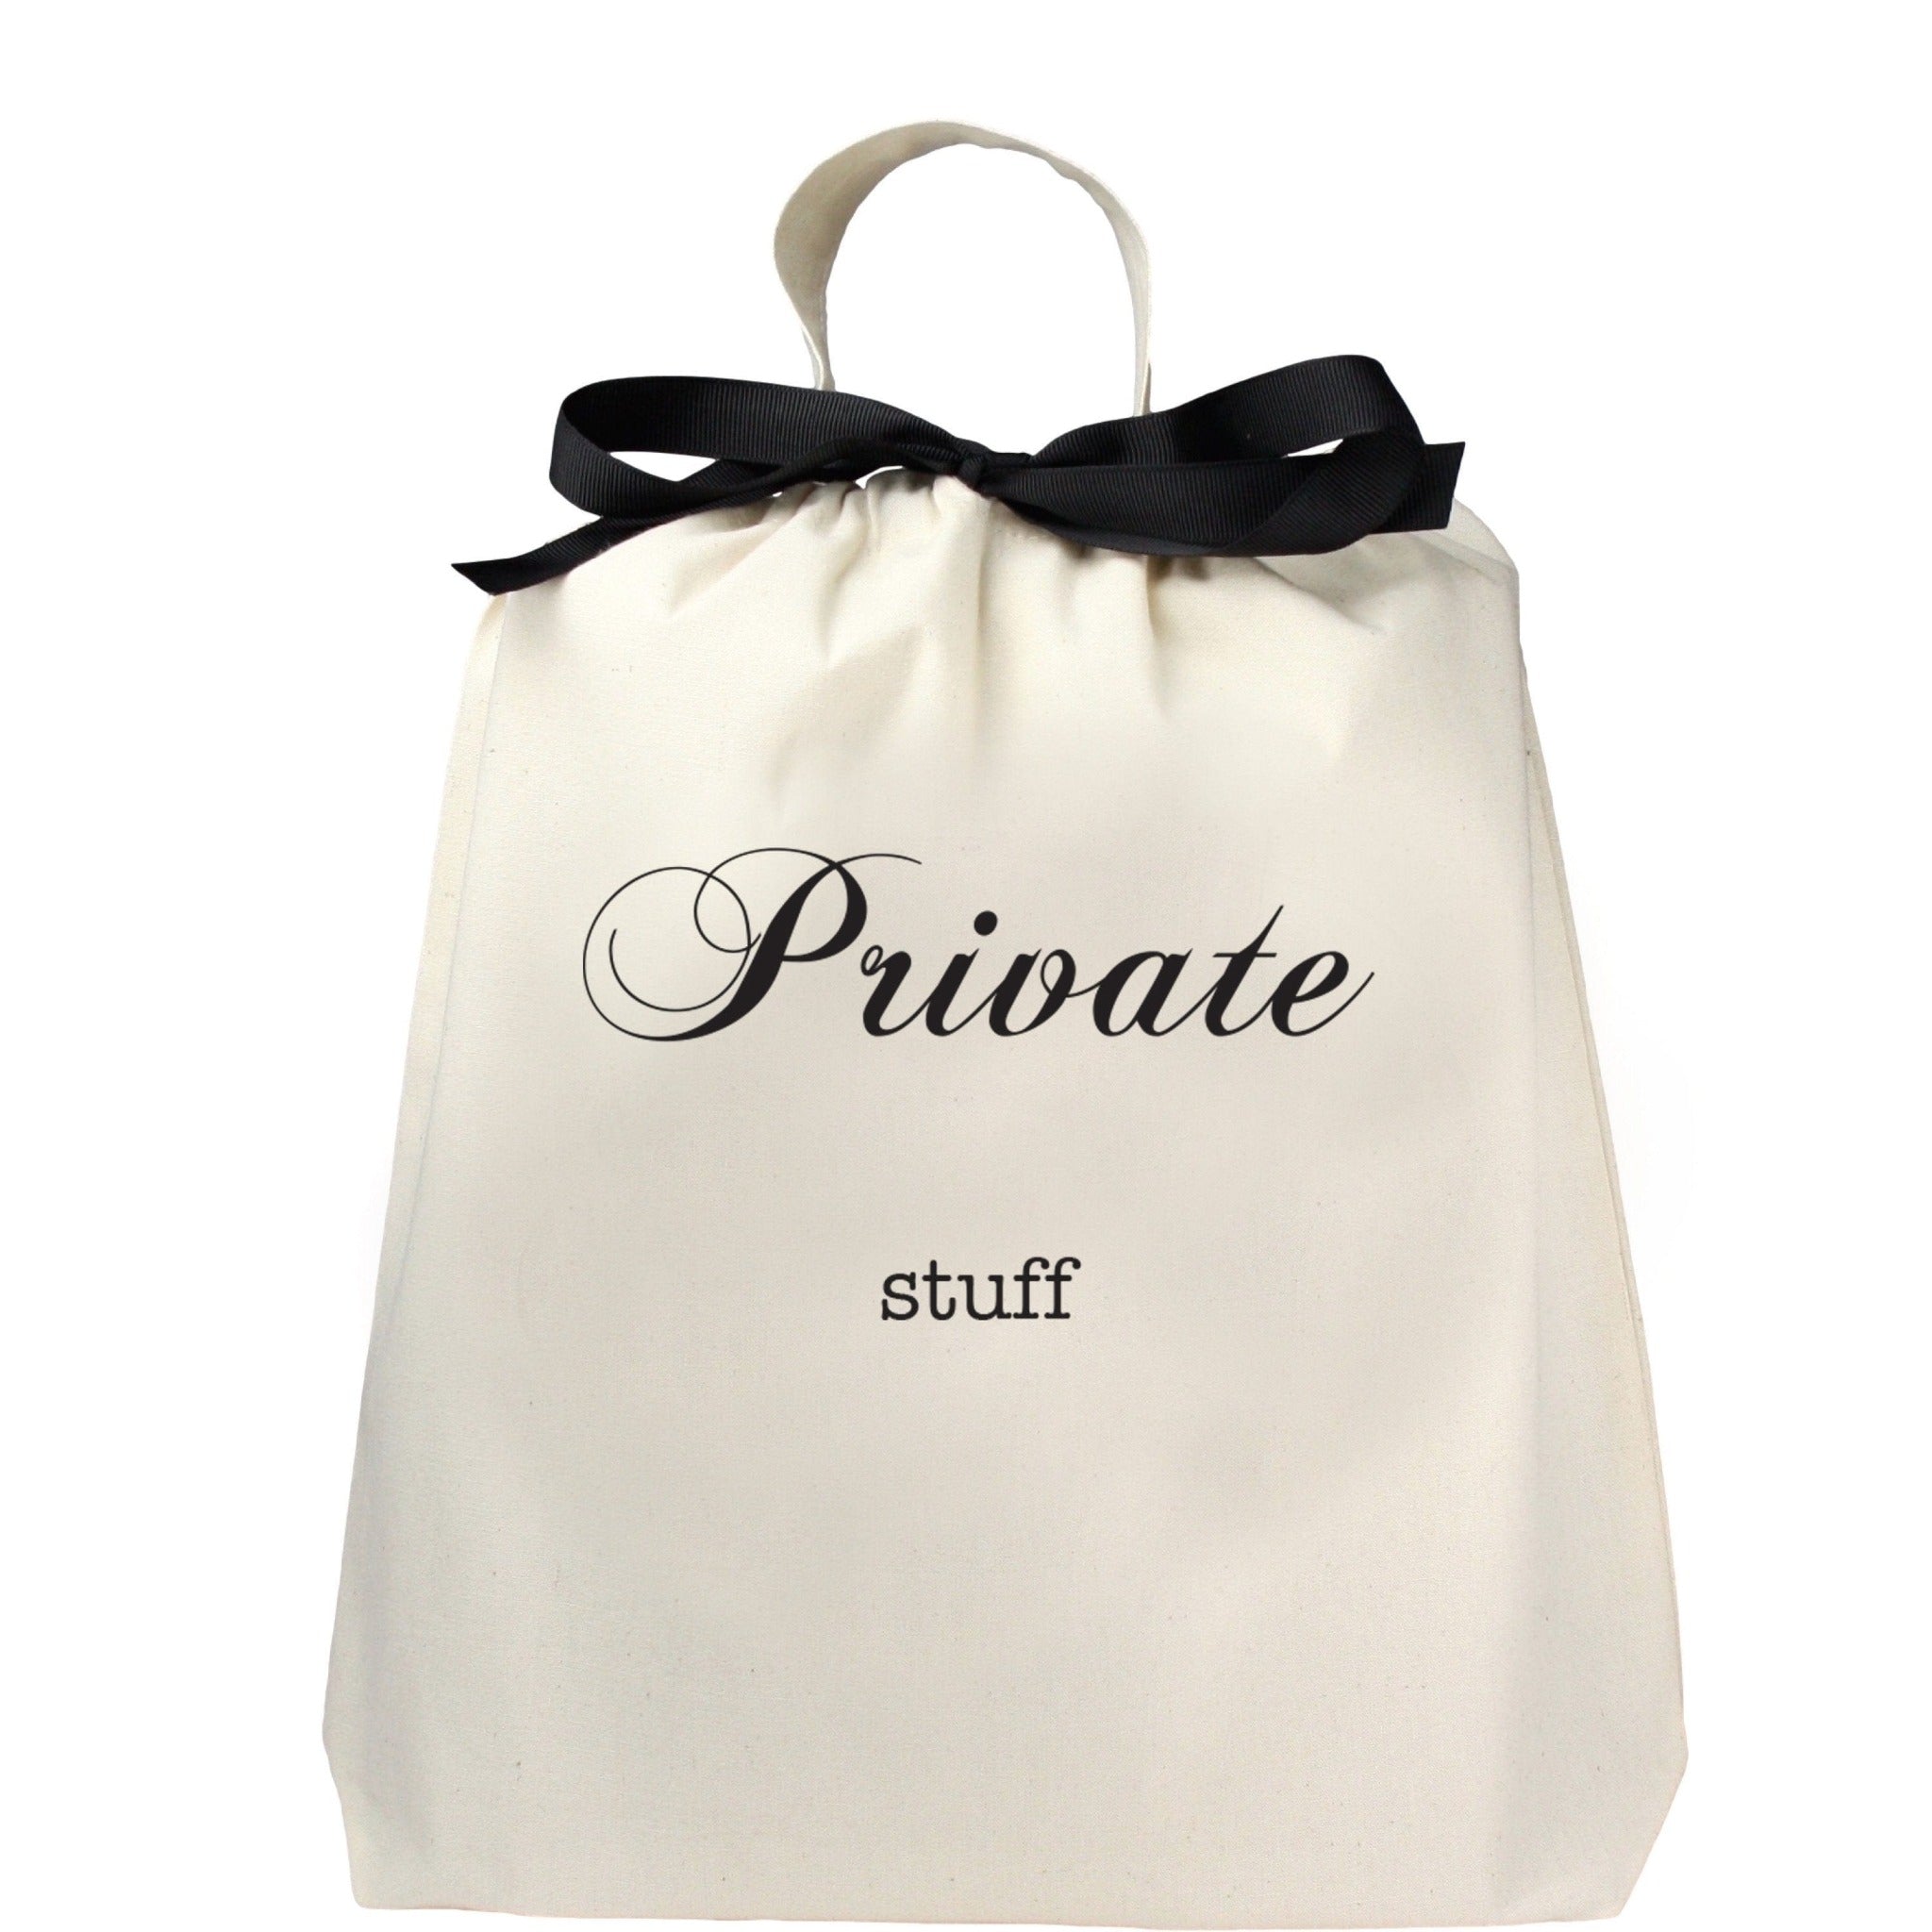 "Private Stuff" printed on front of bag with handle and black ribbon 